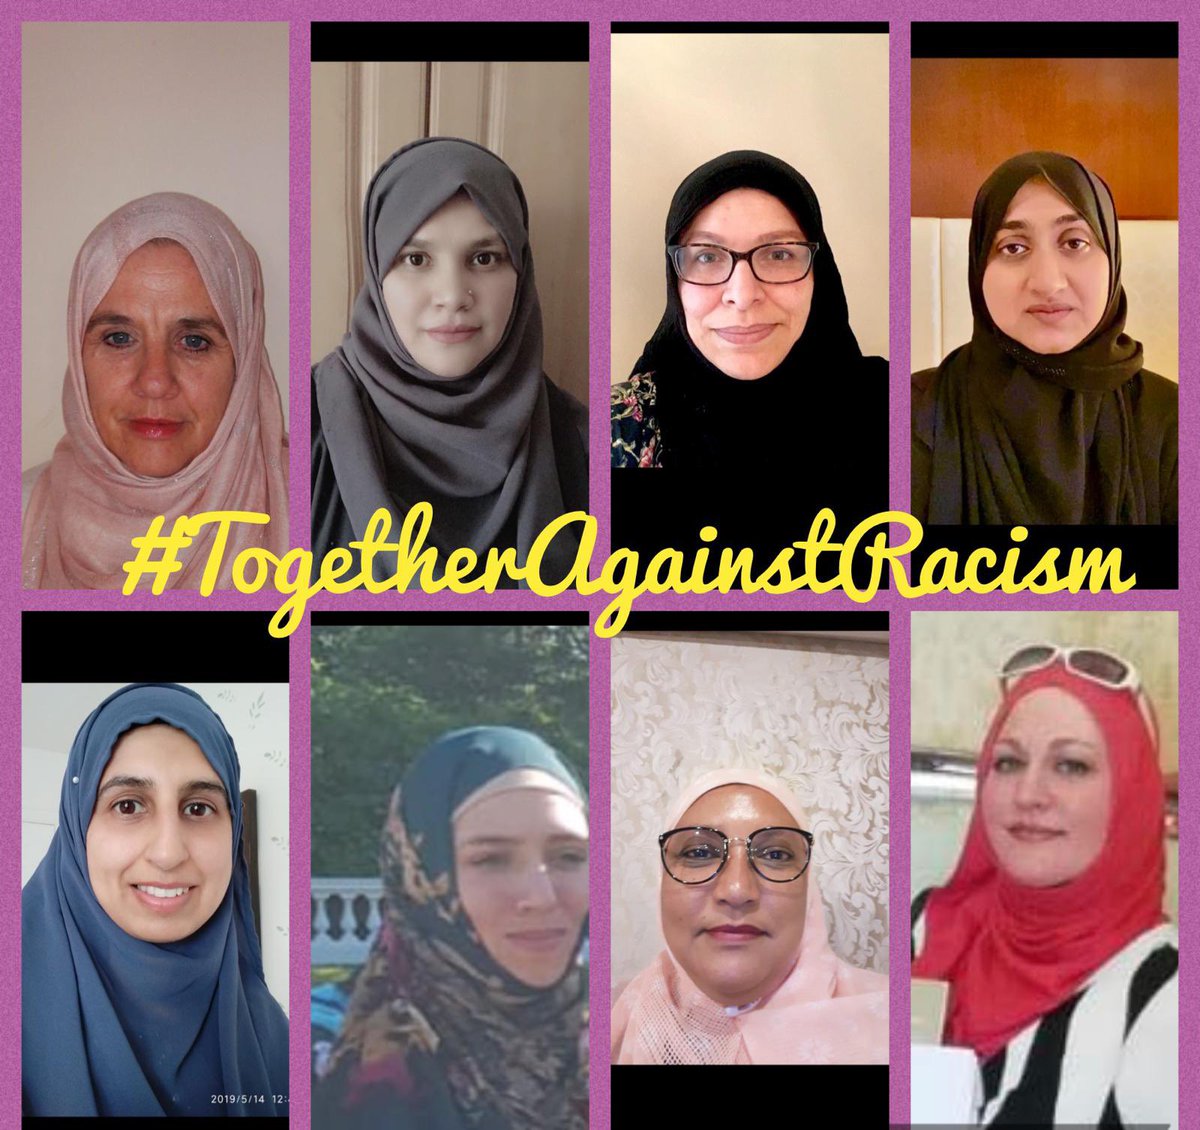 Team Muslim Sisters of Éire #TogetherAgainstRacism with @INARIreland